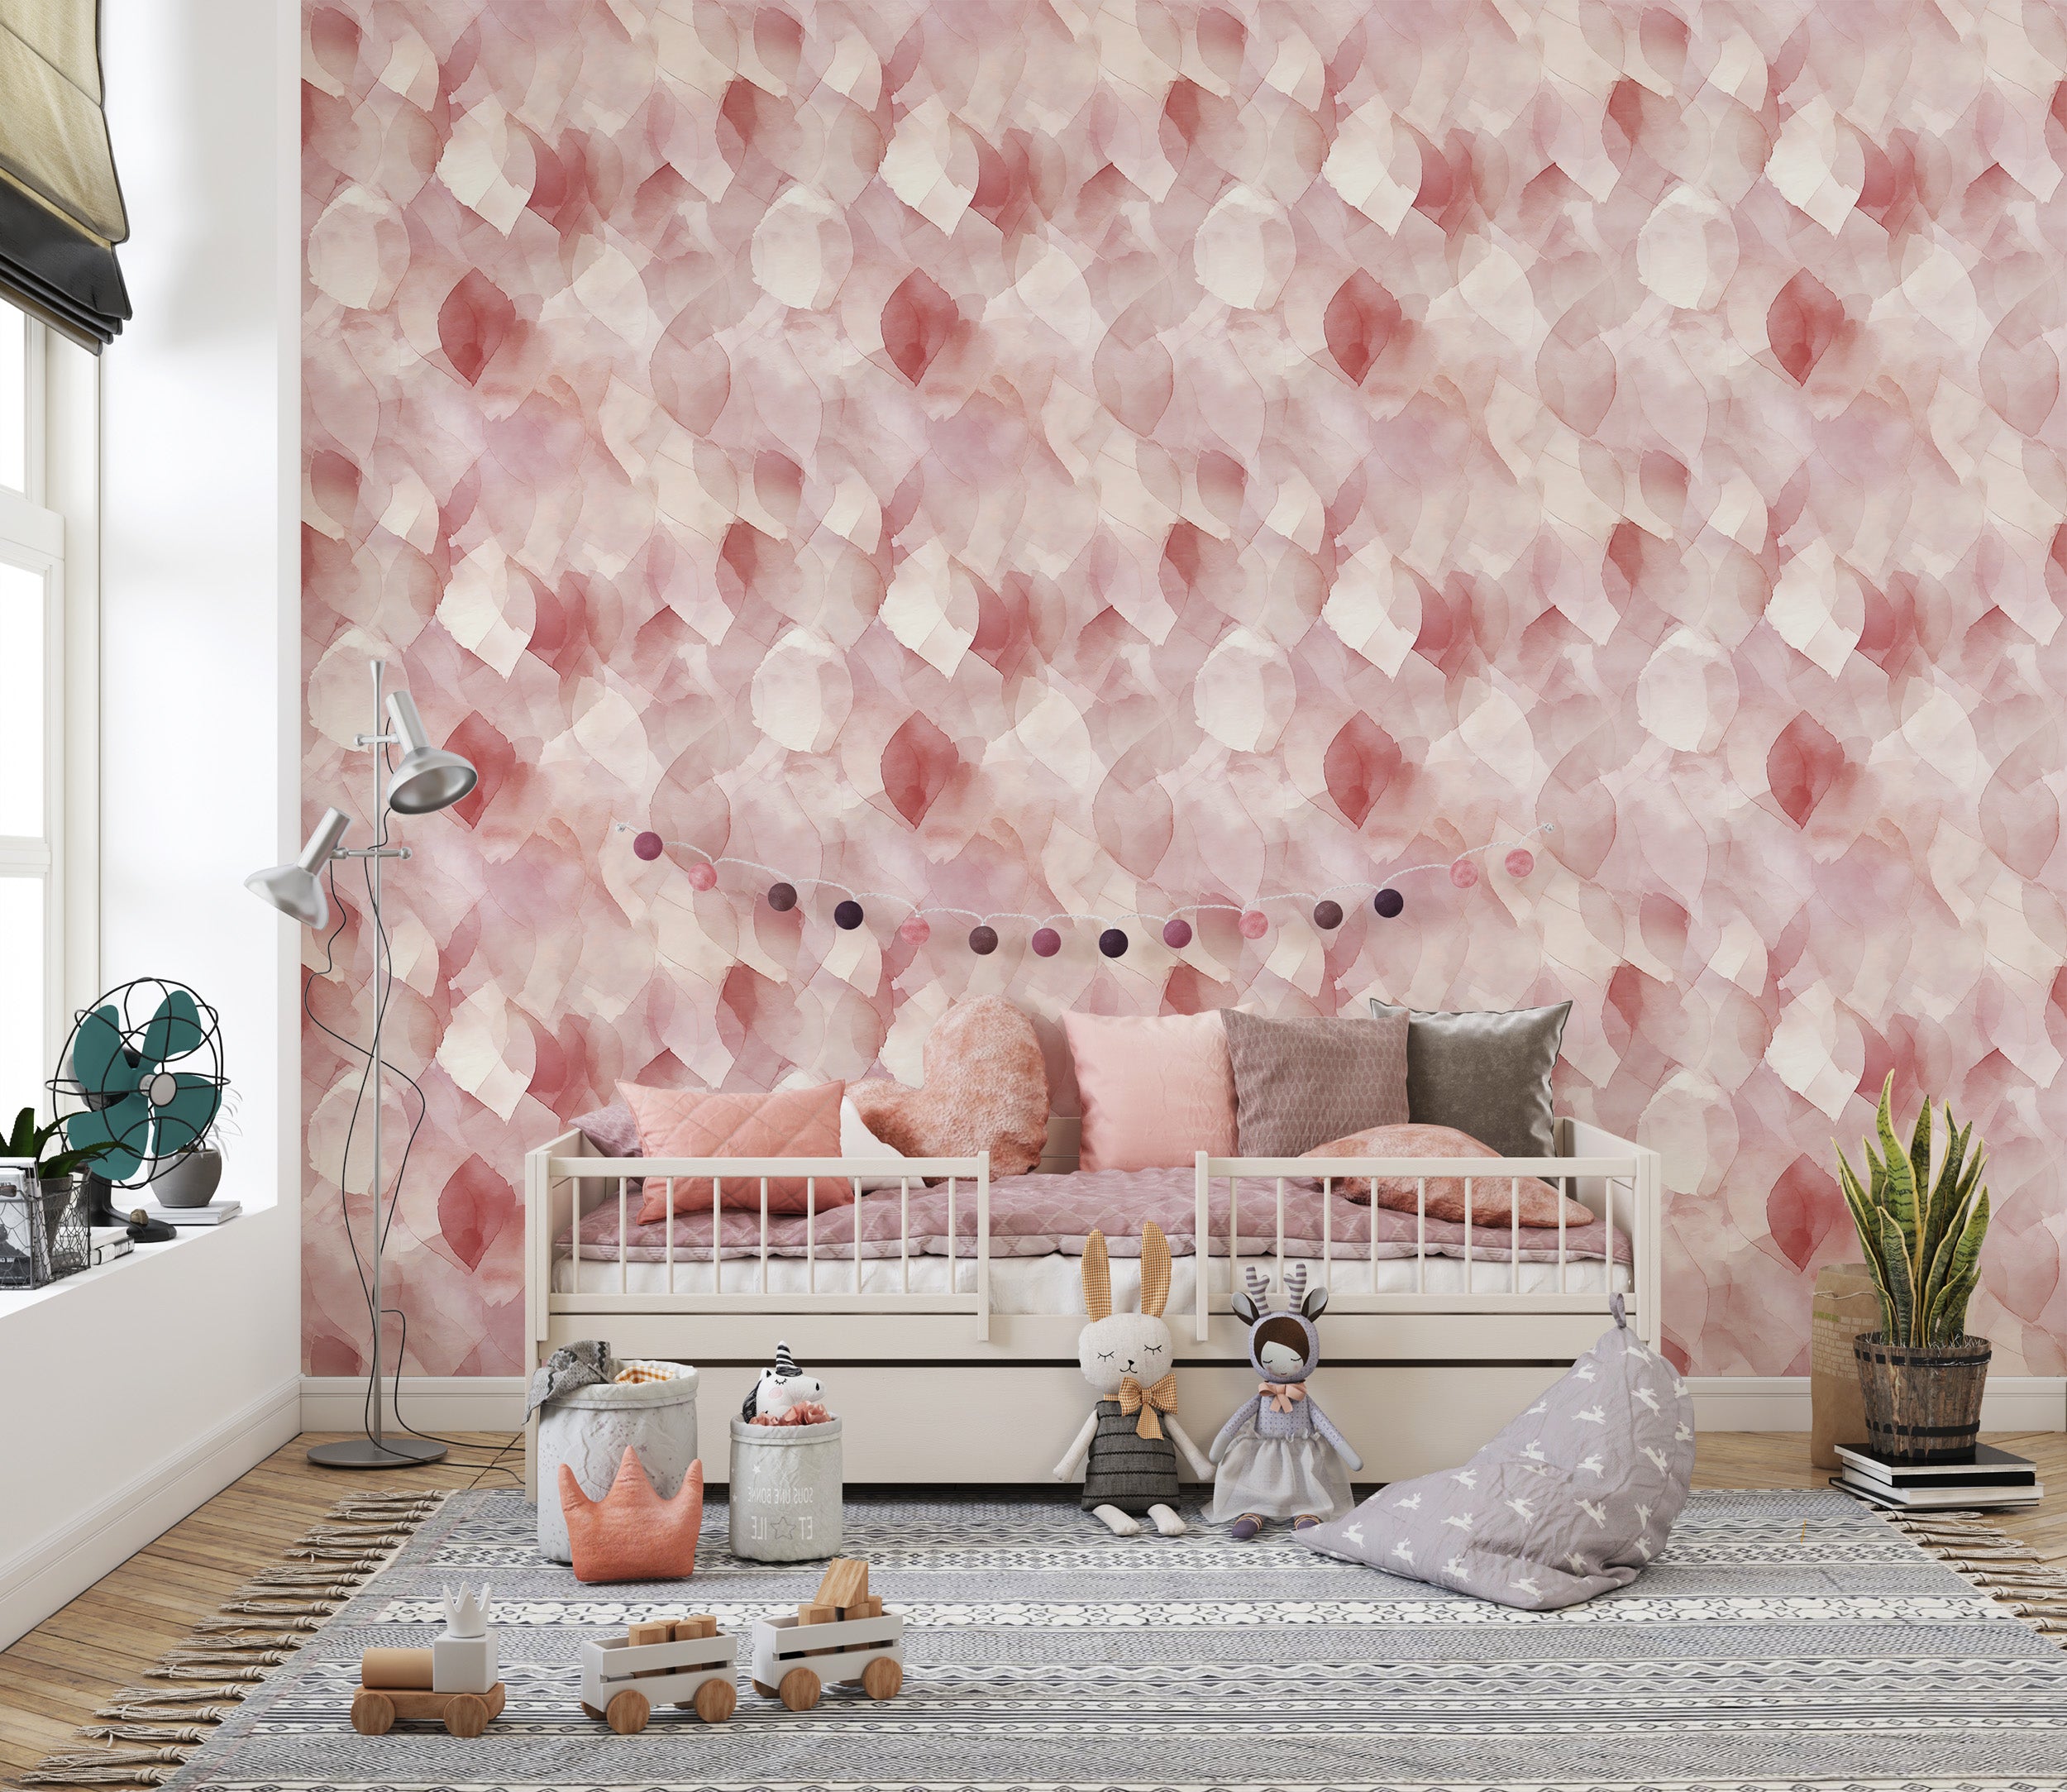 Removable Dusty Rose Wallpaper Aesthetics